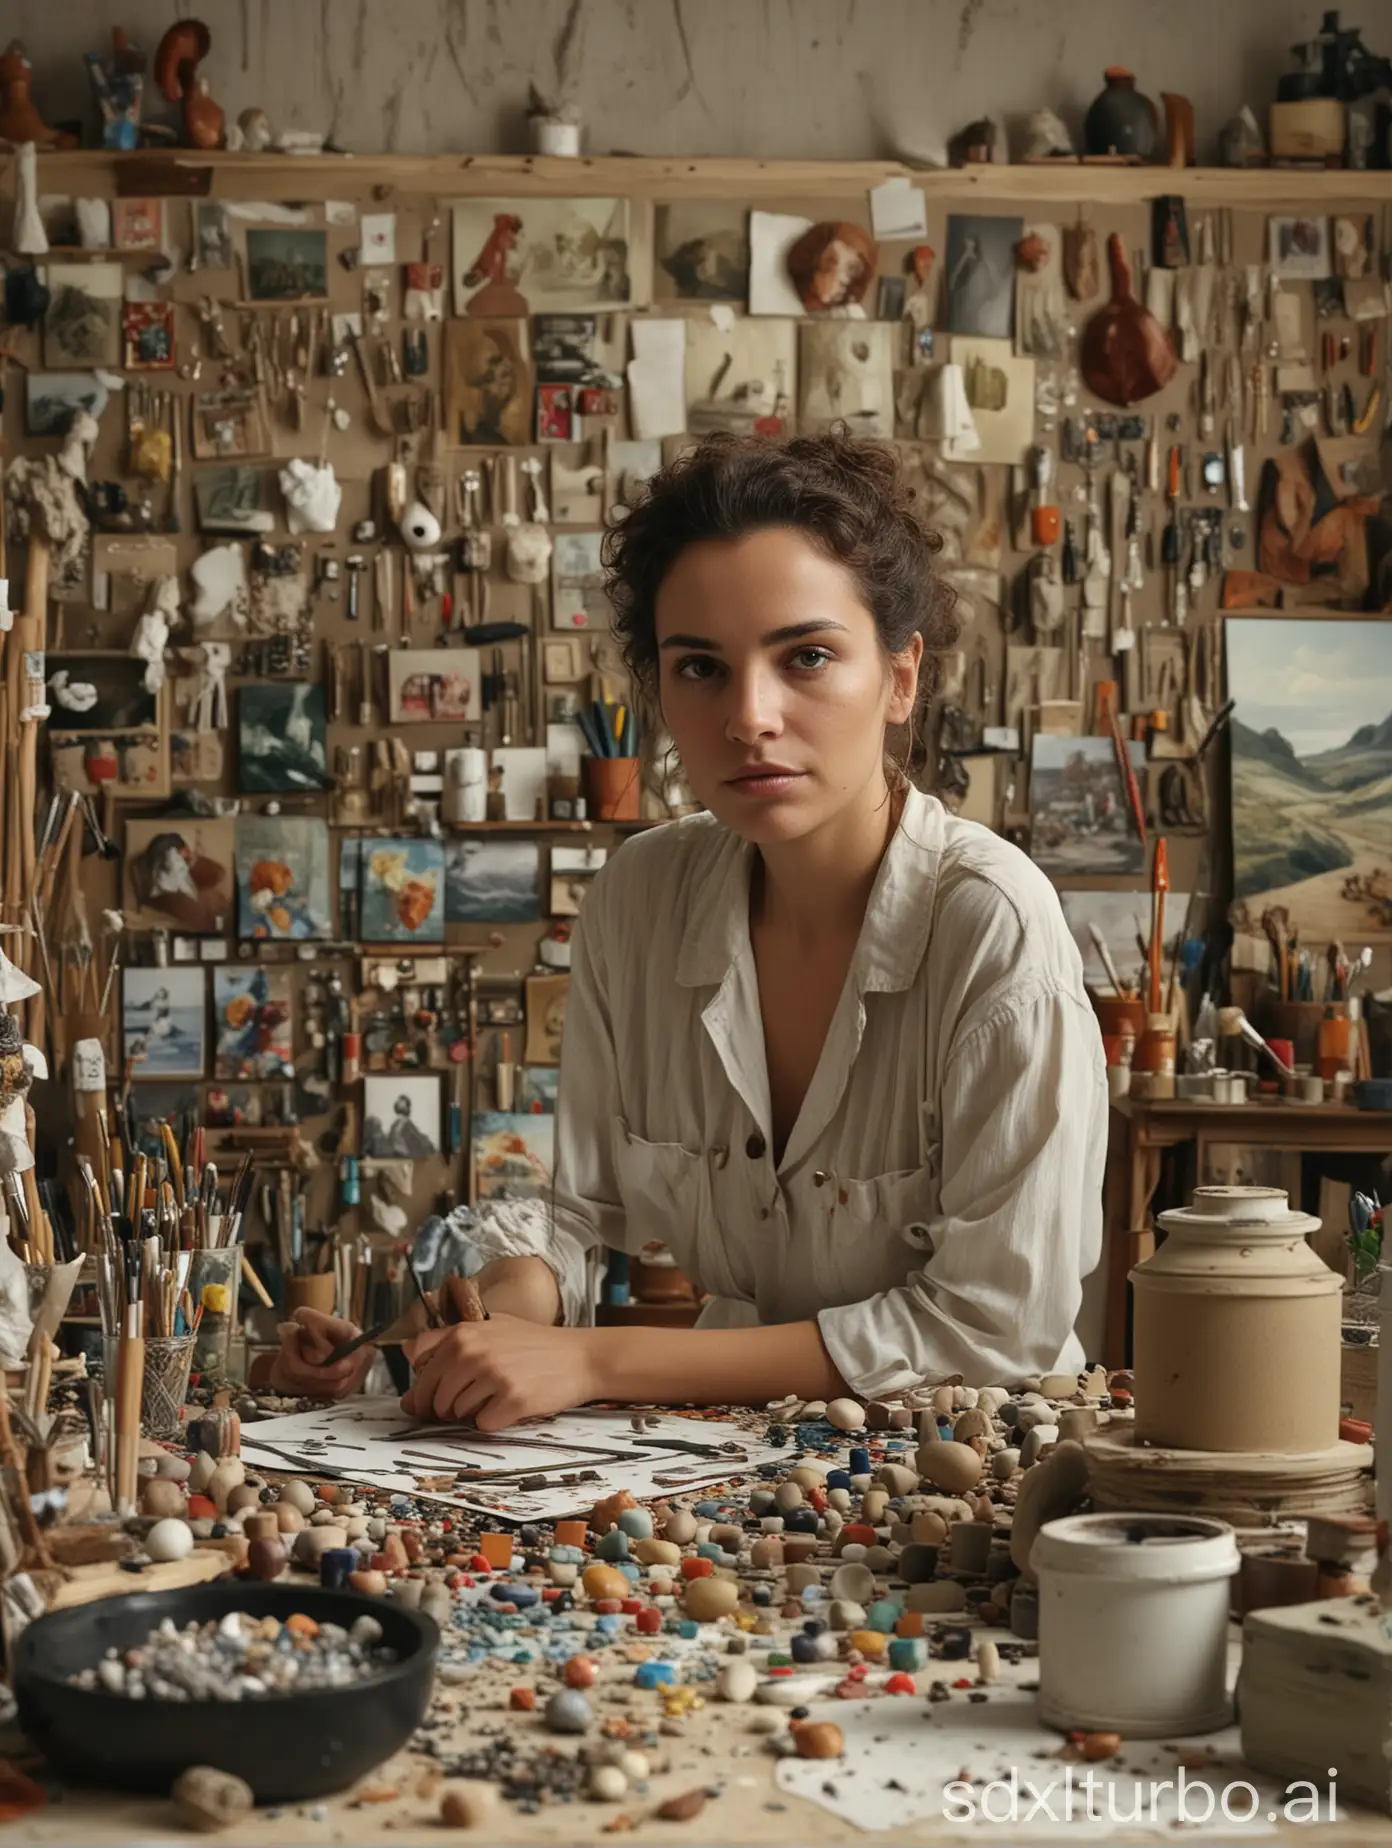 A portrait of an artist focused on their work, surrounded by their creations. Photo, 64K, UHD, seed# 223366332